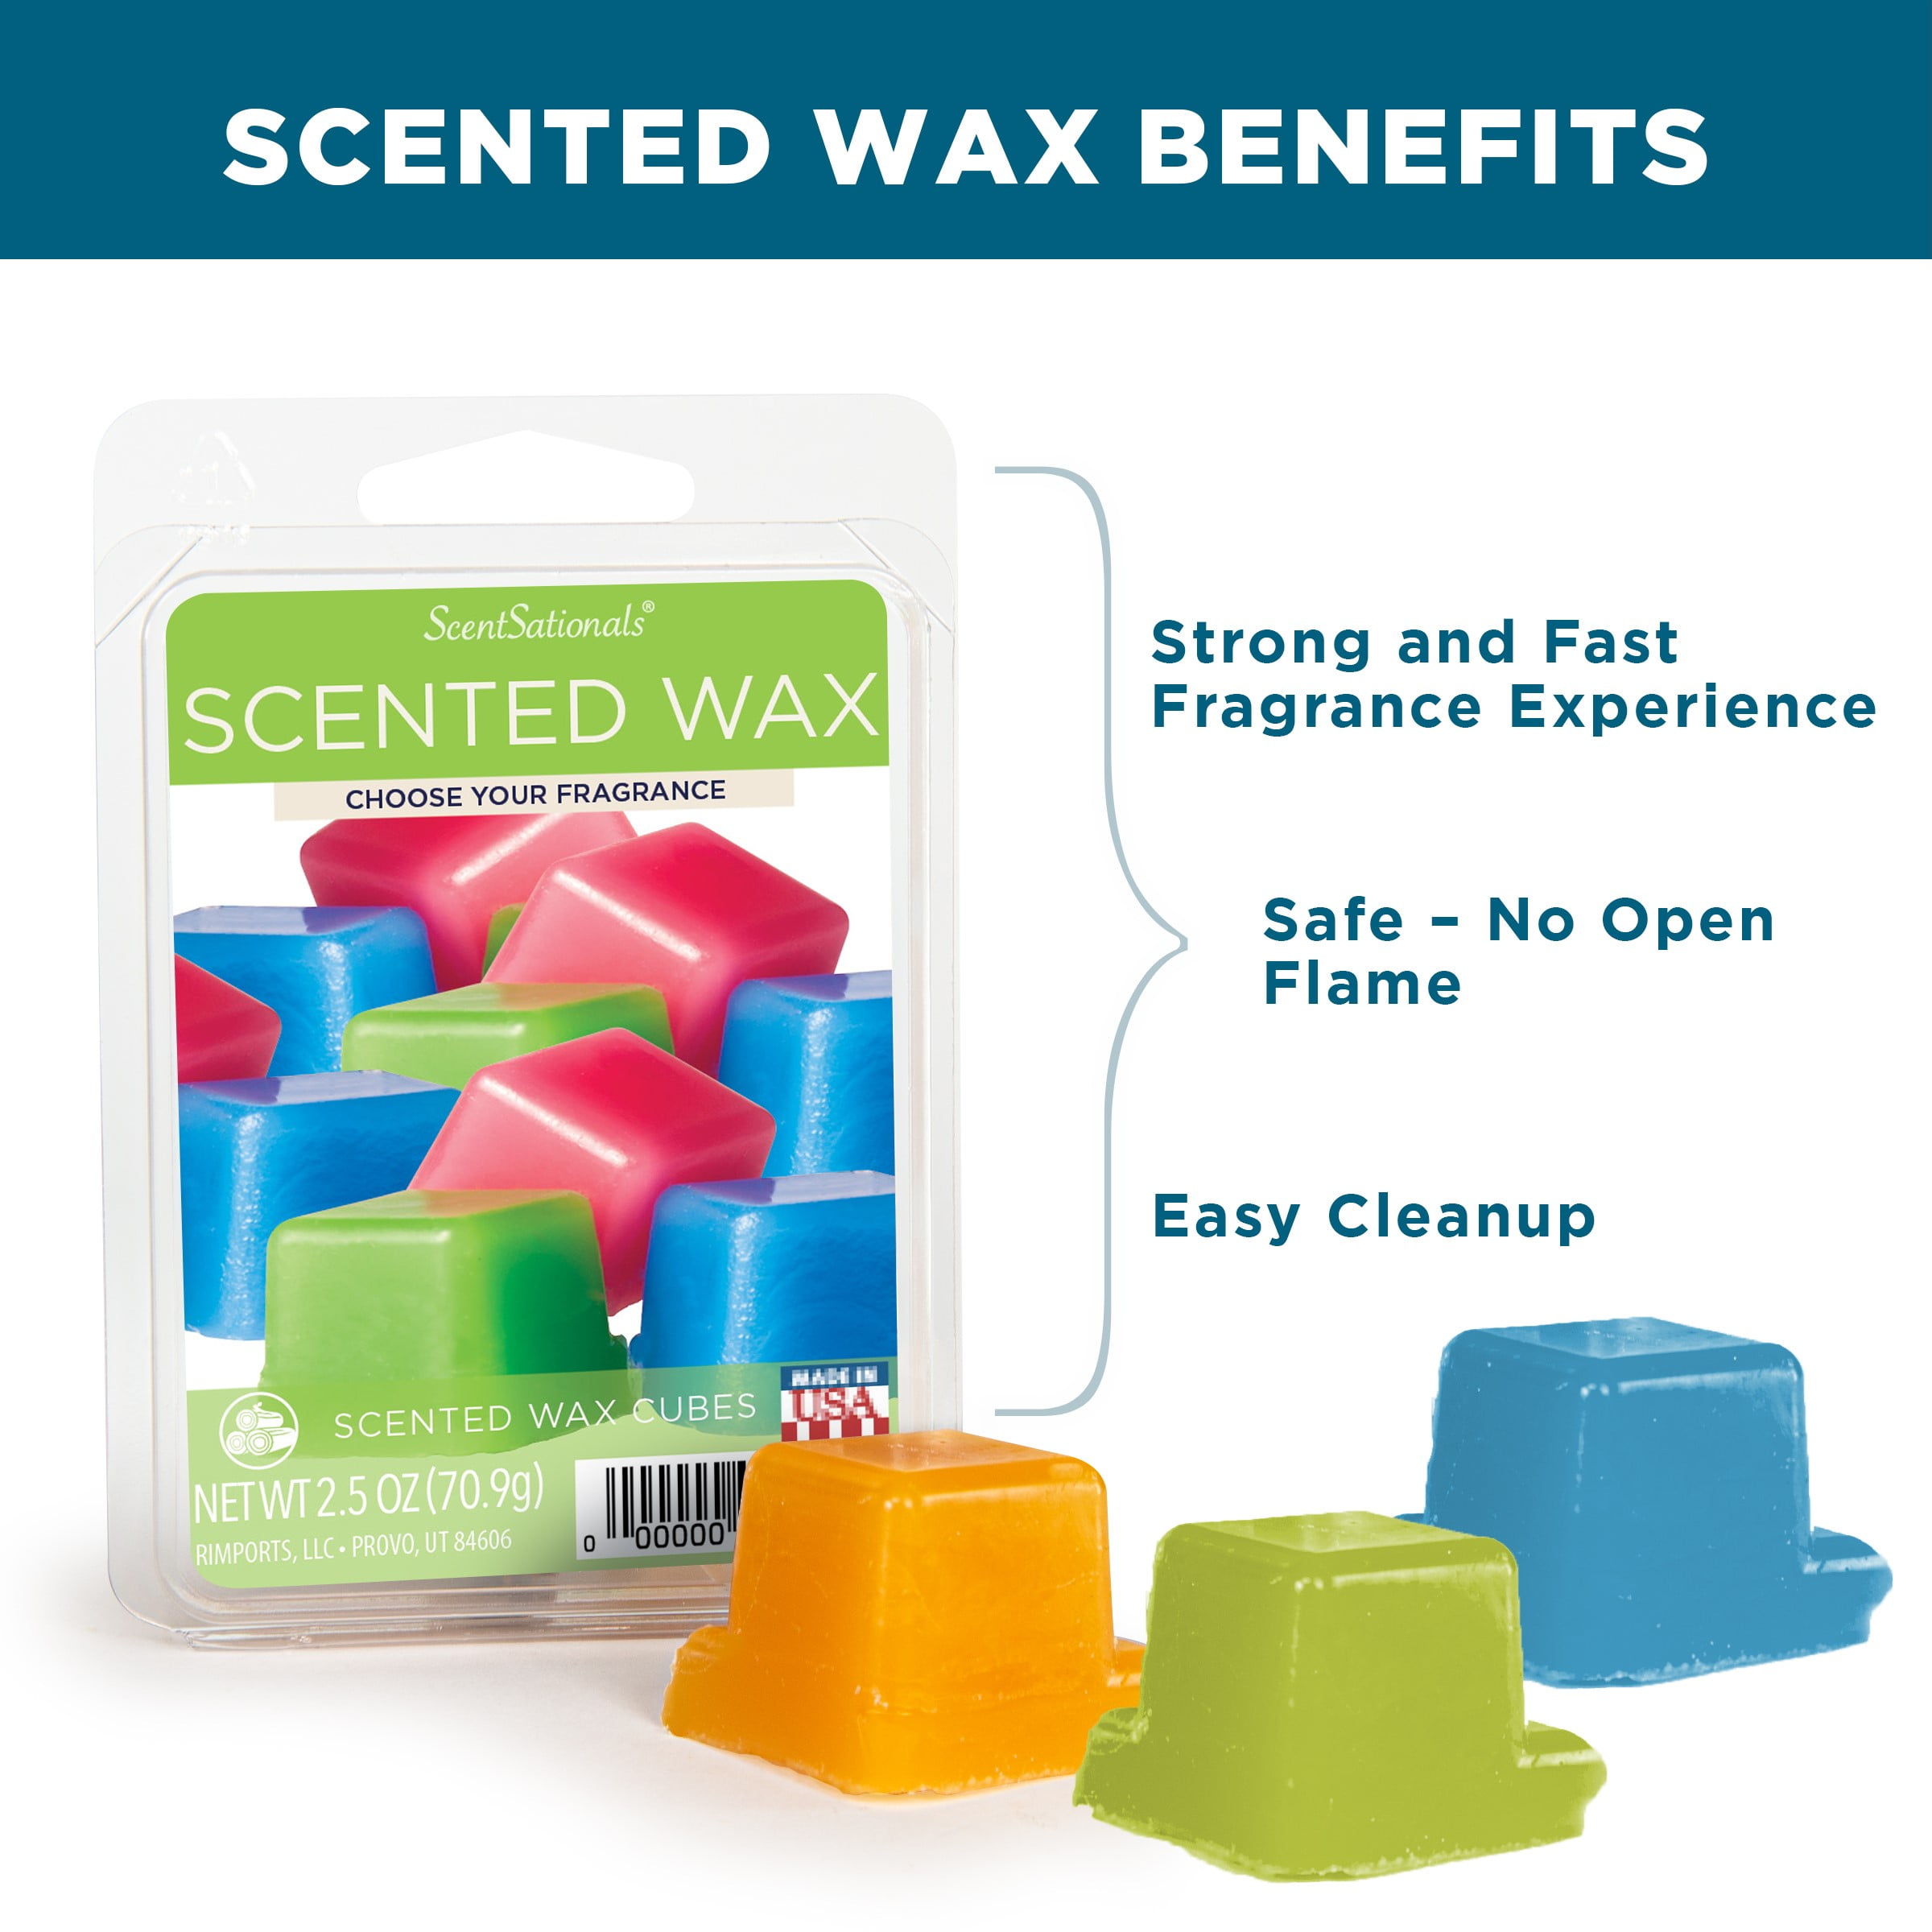 Cinnamon Apple Berry Scented Wax Melts 2 Pack With FREE SHIPPING Scented  Soy Wax Cubes Compare to Scentsy® Wax Melts 